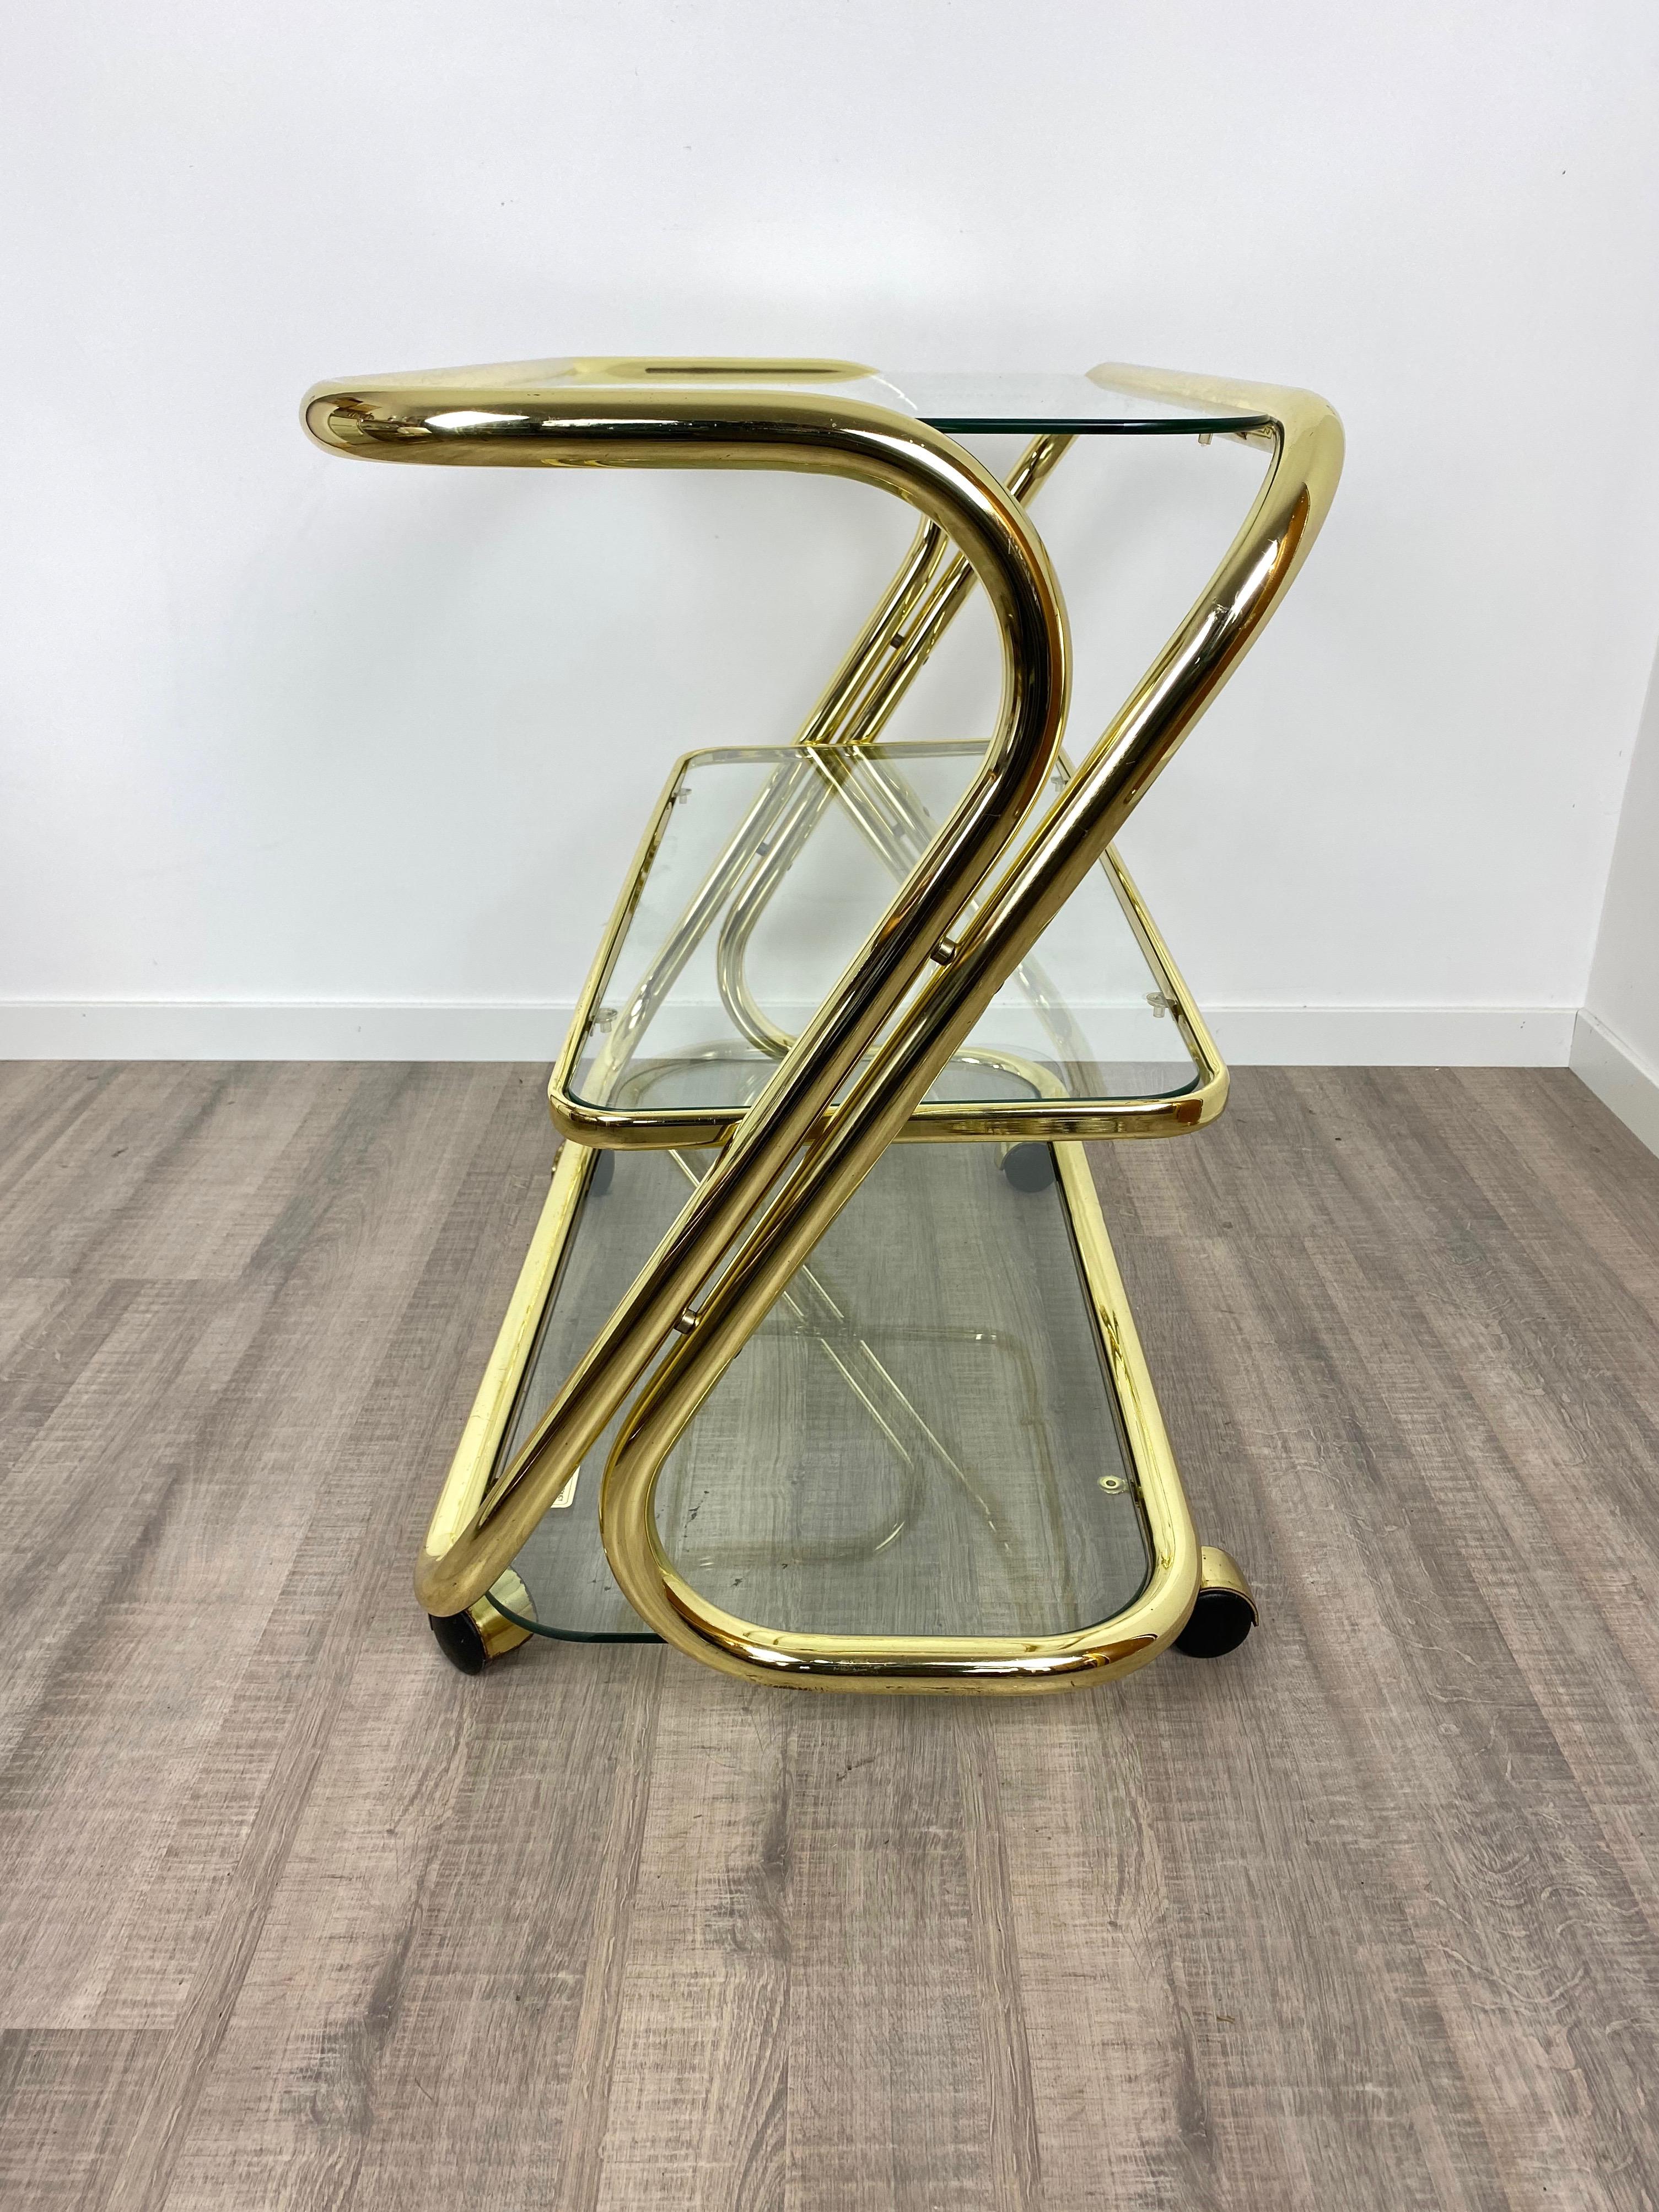 Serving Cart Trolley in Glass and Golden Metal by Morex, Italy, 1980s For Sale 1